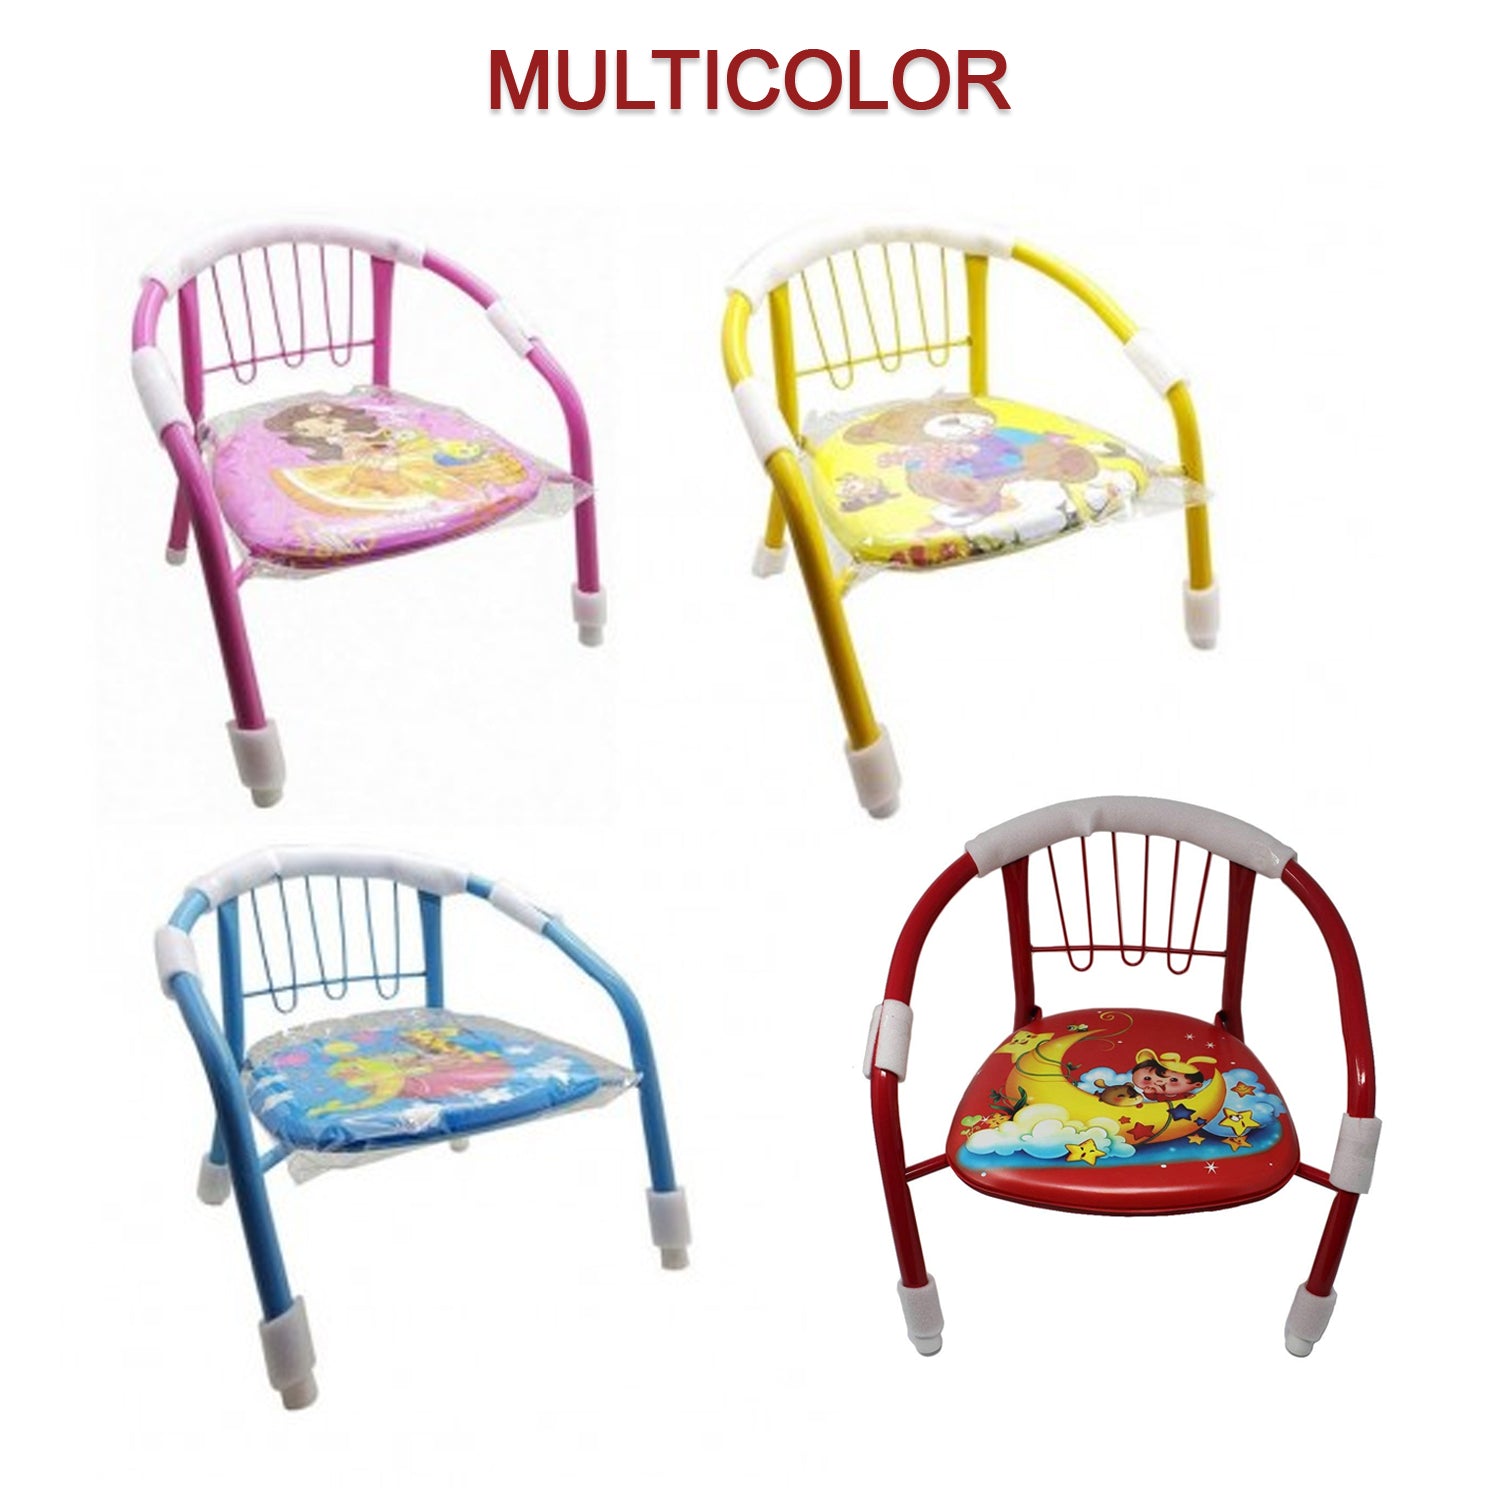 1257 Multicolor Cartoon Design Baby Chair with Metal Backrest Frame & Sound Seated Soft Cushion for kids & Toddlers (MOQ - 4 pcs) 